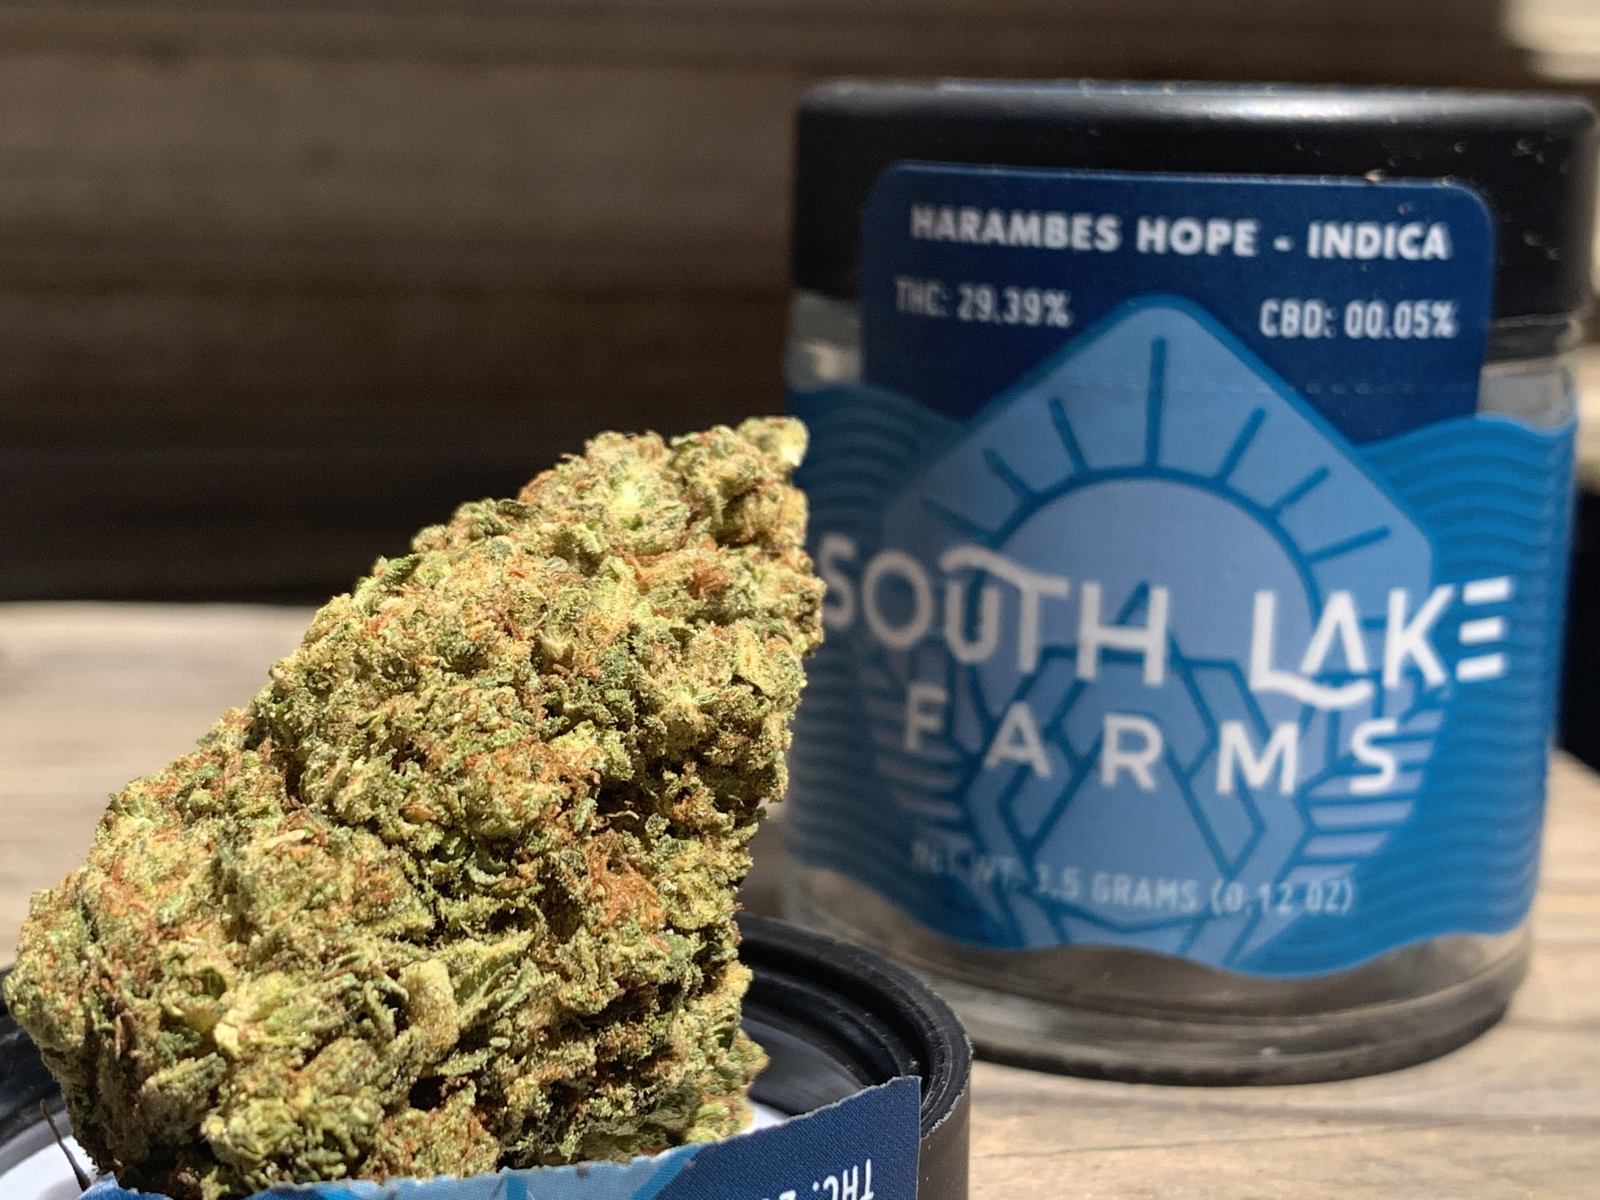 South Lake Farms Haramabes Hope packaged eighth